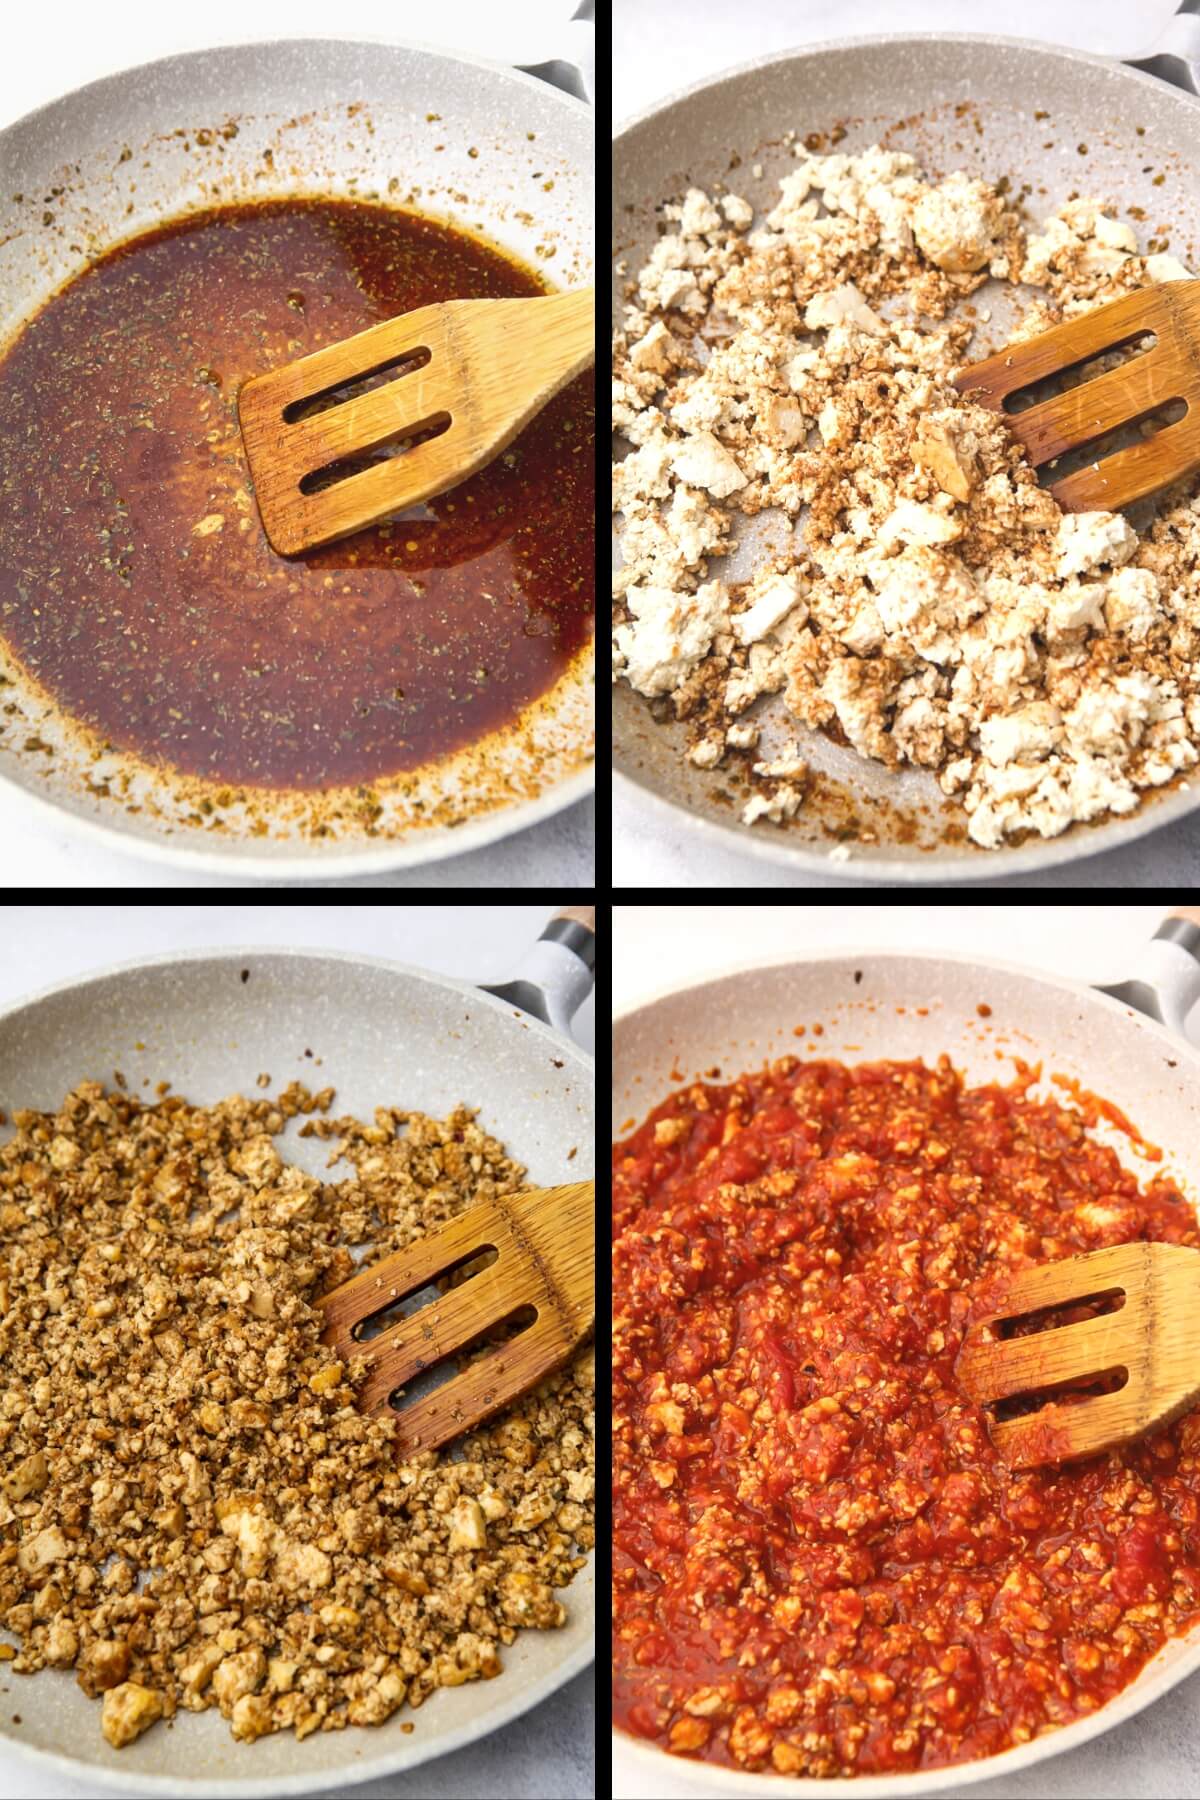 A collage of 4 images showing the process steps of seasoning and cooking crumbled tofu then adding tomato sauce to make tofu Bolognese.